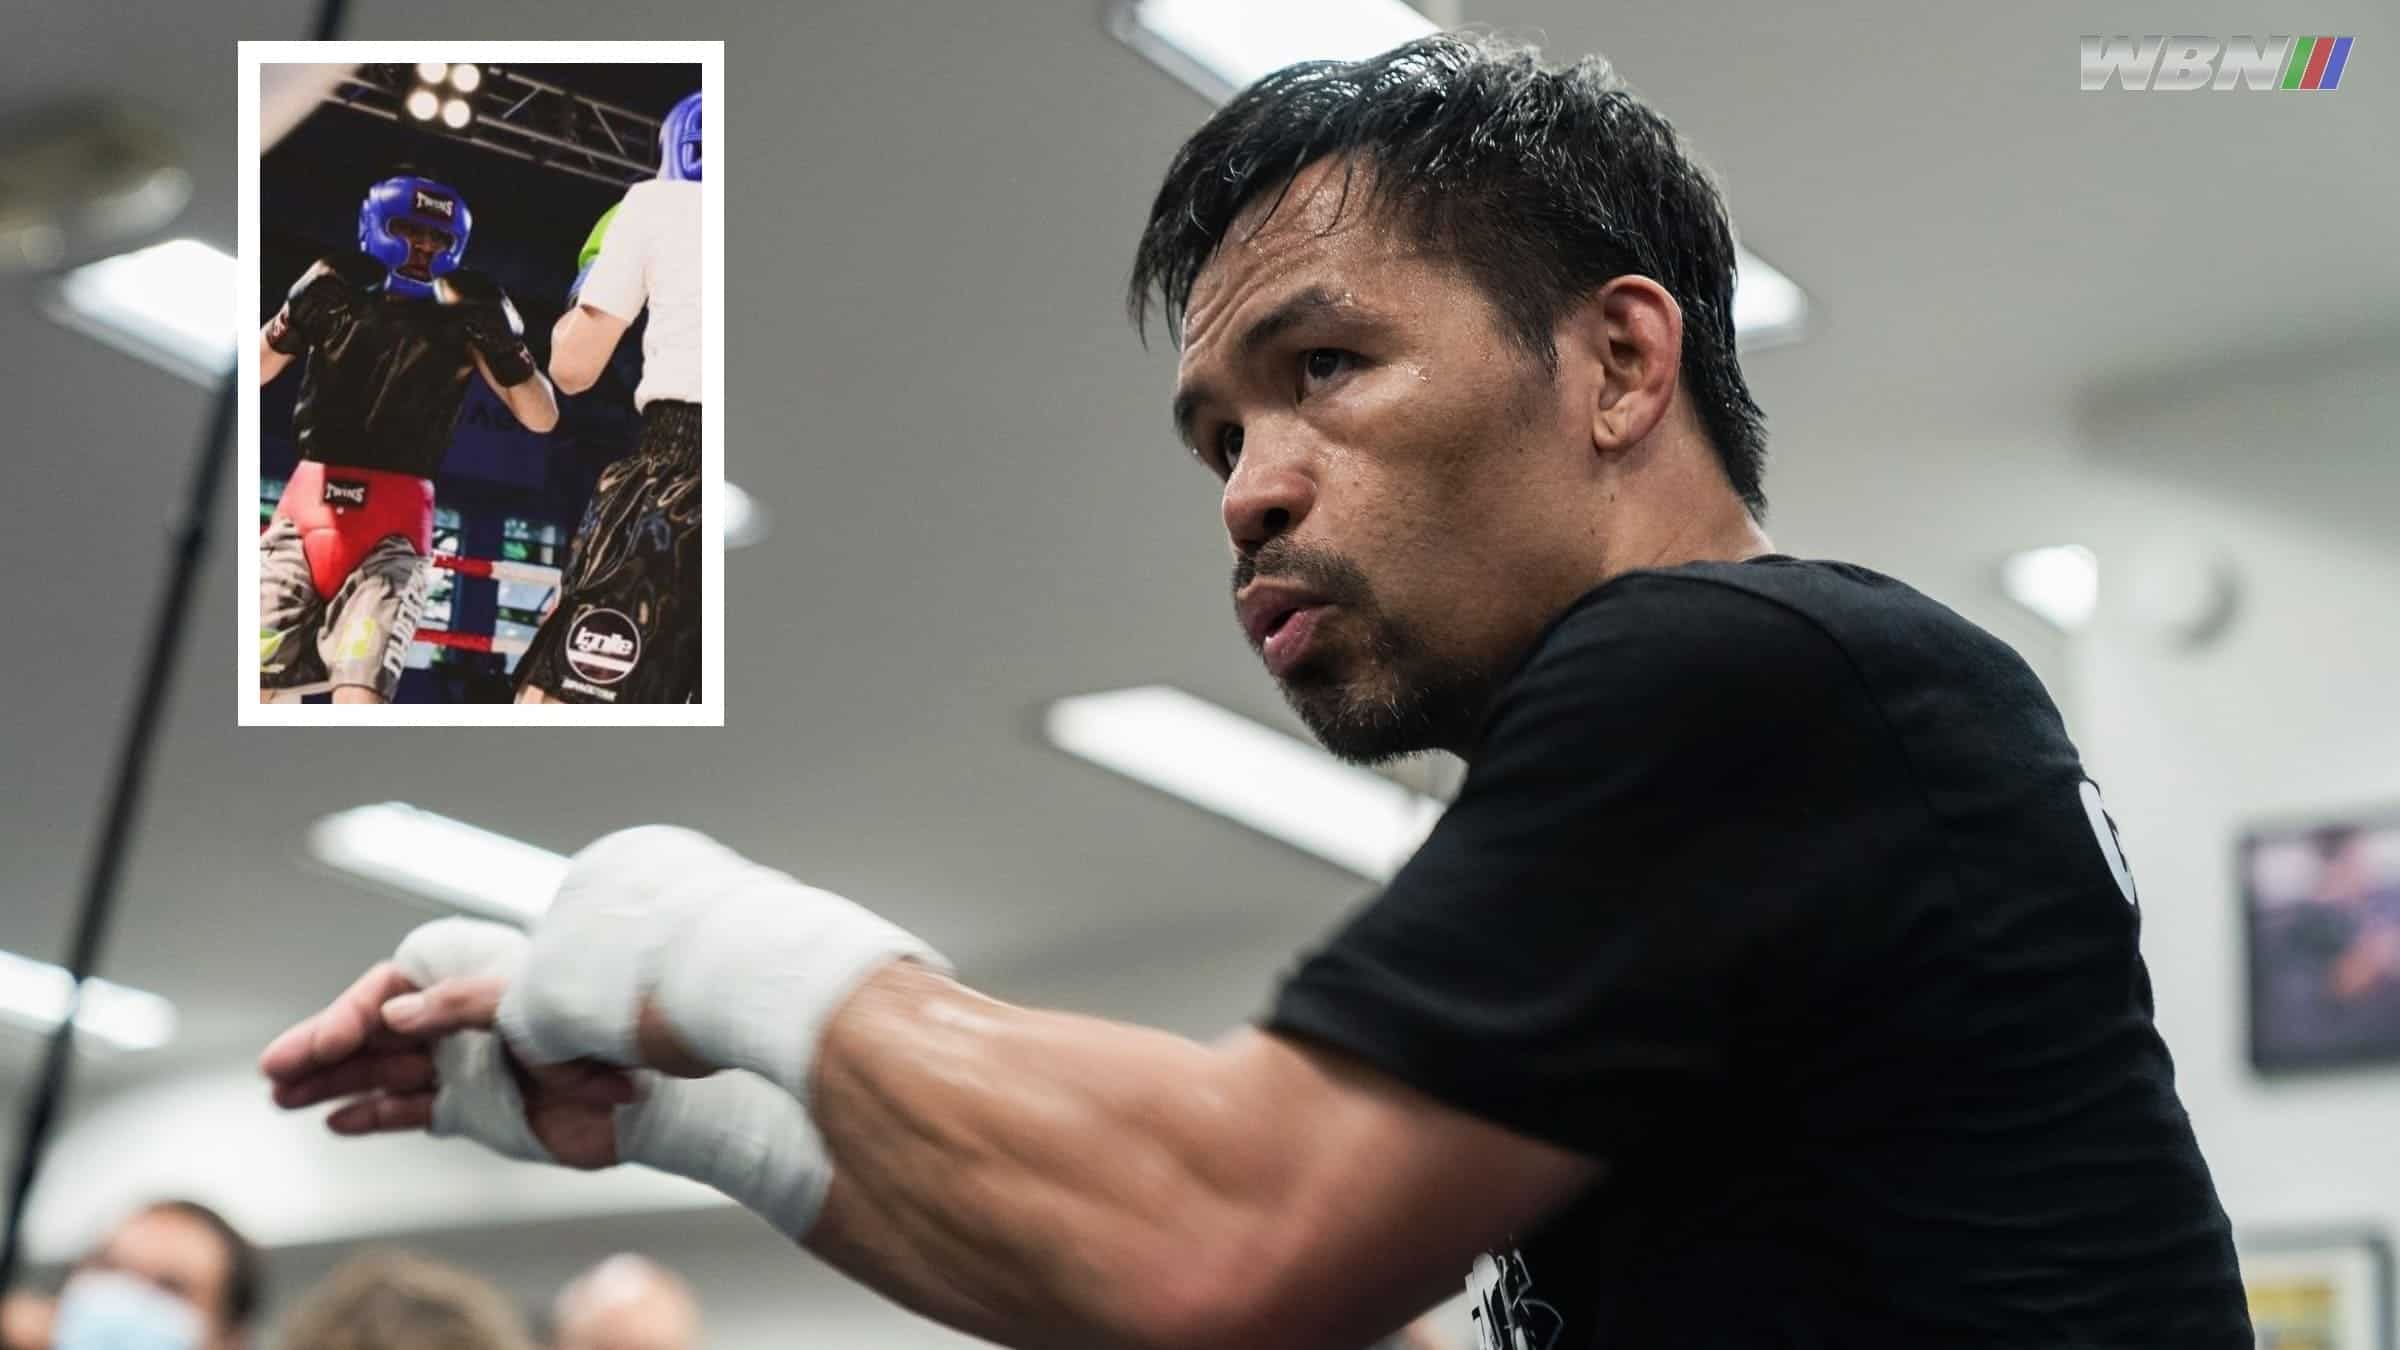 Manny Pacquiao’s second son wins boxing debut, Marcial also wins